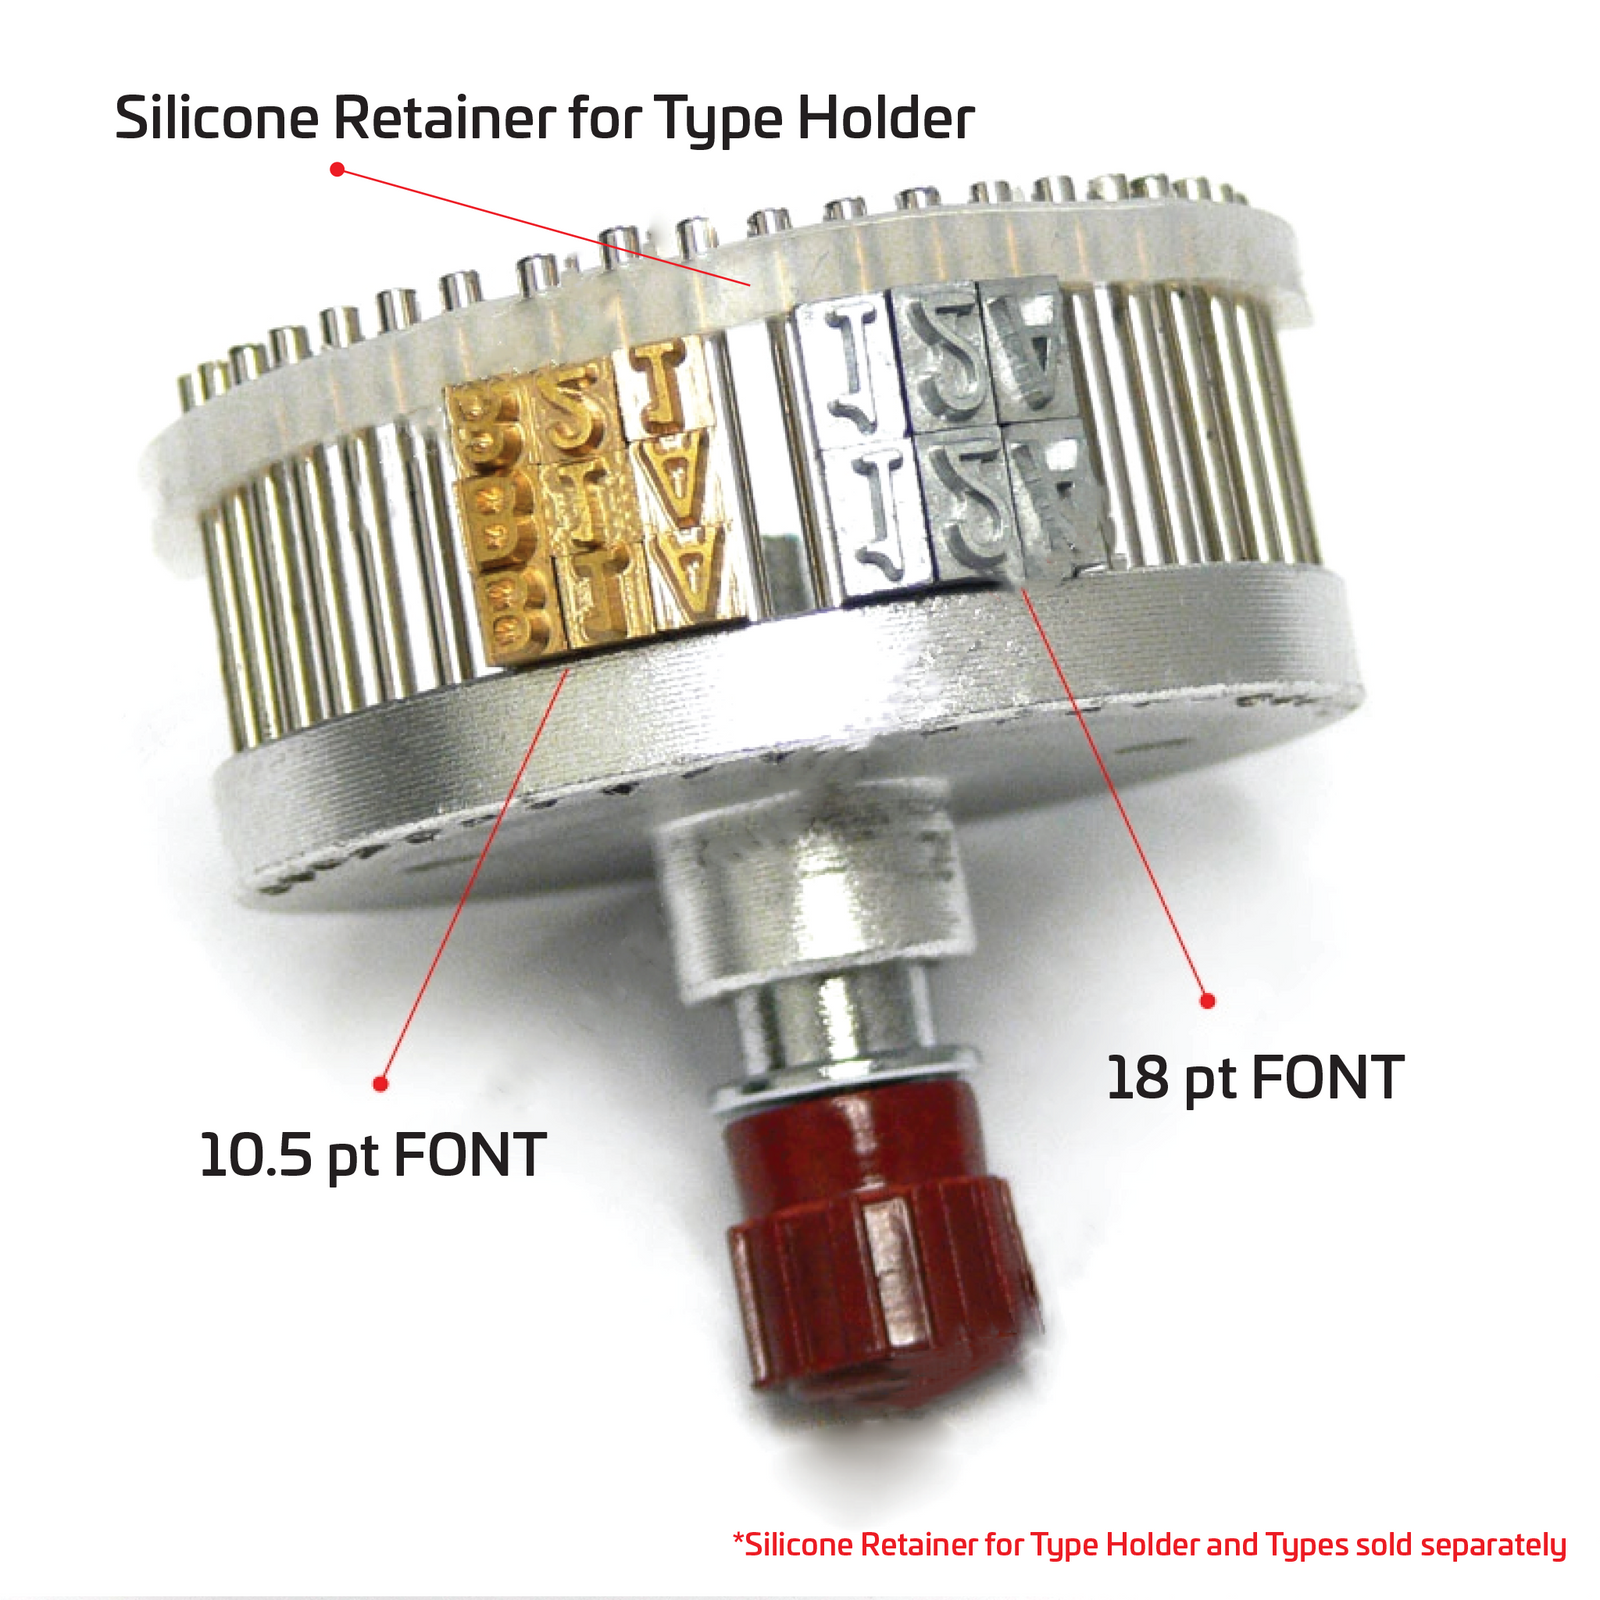 Type holder for hot ink roll printing and types compatible with a JORES TECHNOLOGIES® continuous Band sealer with coder. Text mentions and shows the size of fonts used are 10.5 pt and 18 pt. It is also shown where the silicone retainer for type holder is placed and it states that types and retainer are sold separately